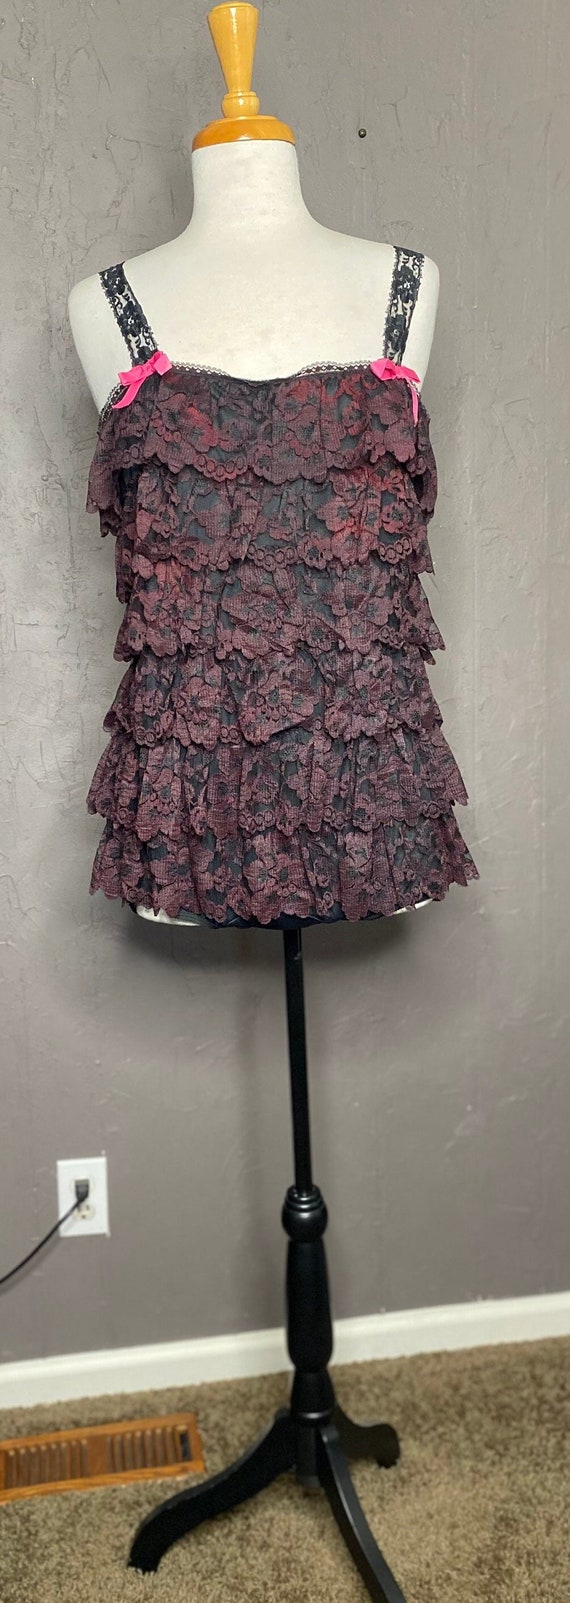 1960’s Deadstock Black and Pink Ruffled Lace Rompe